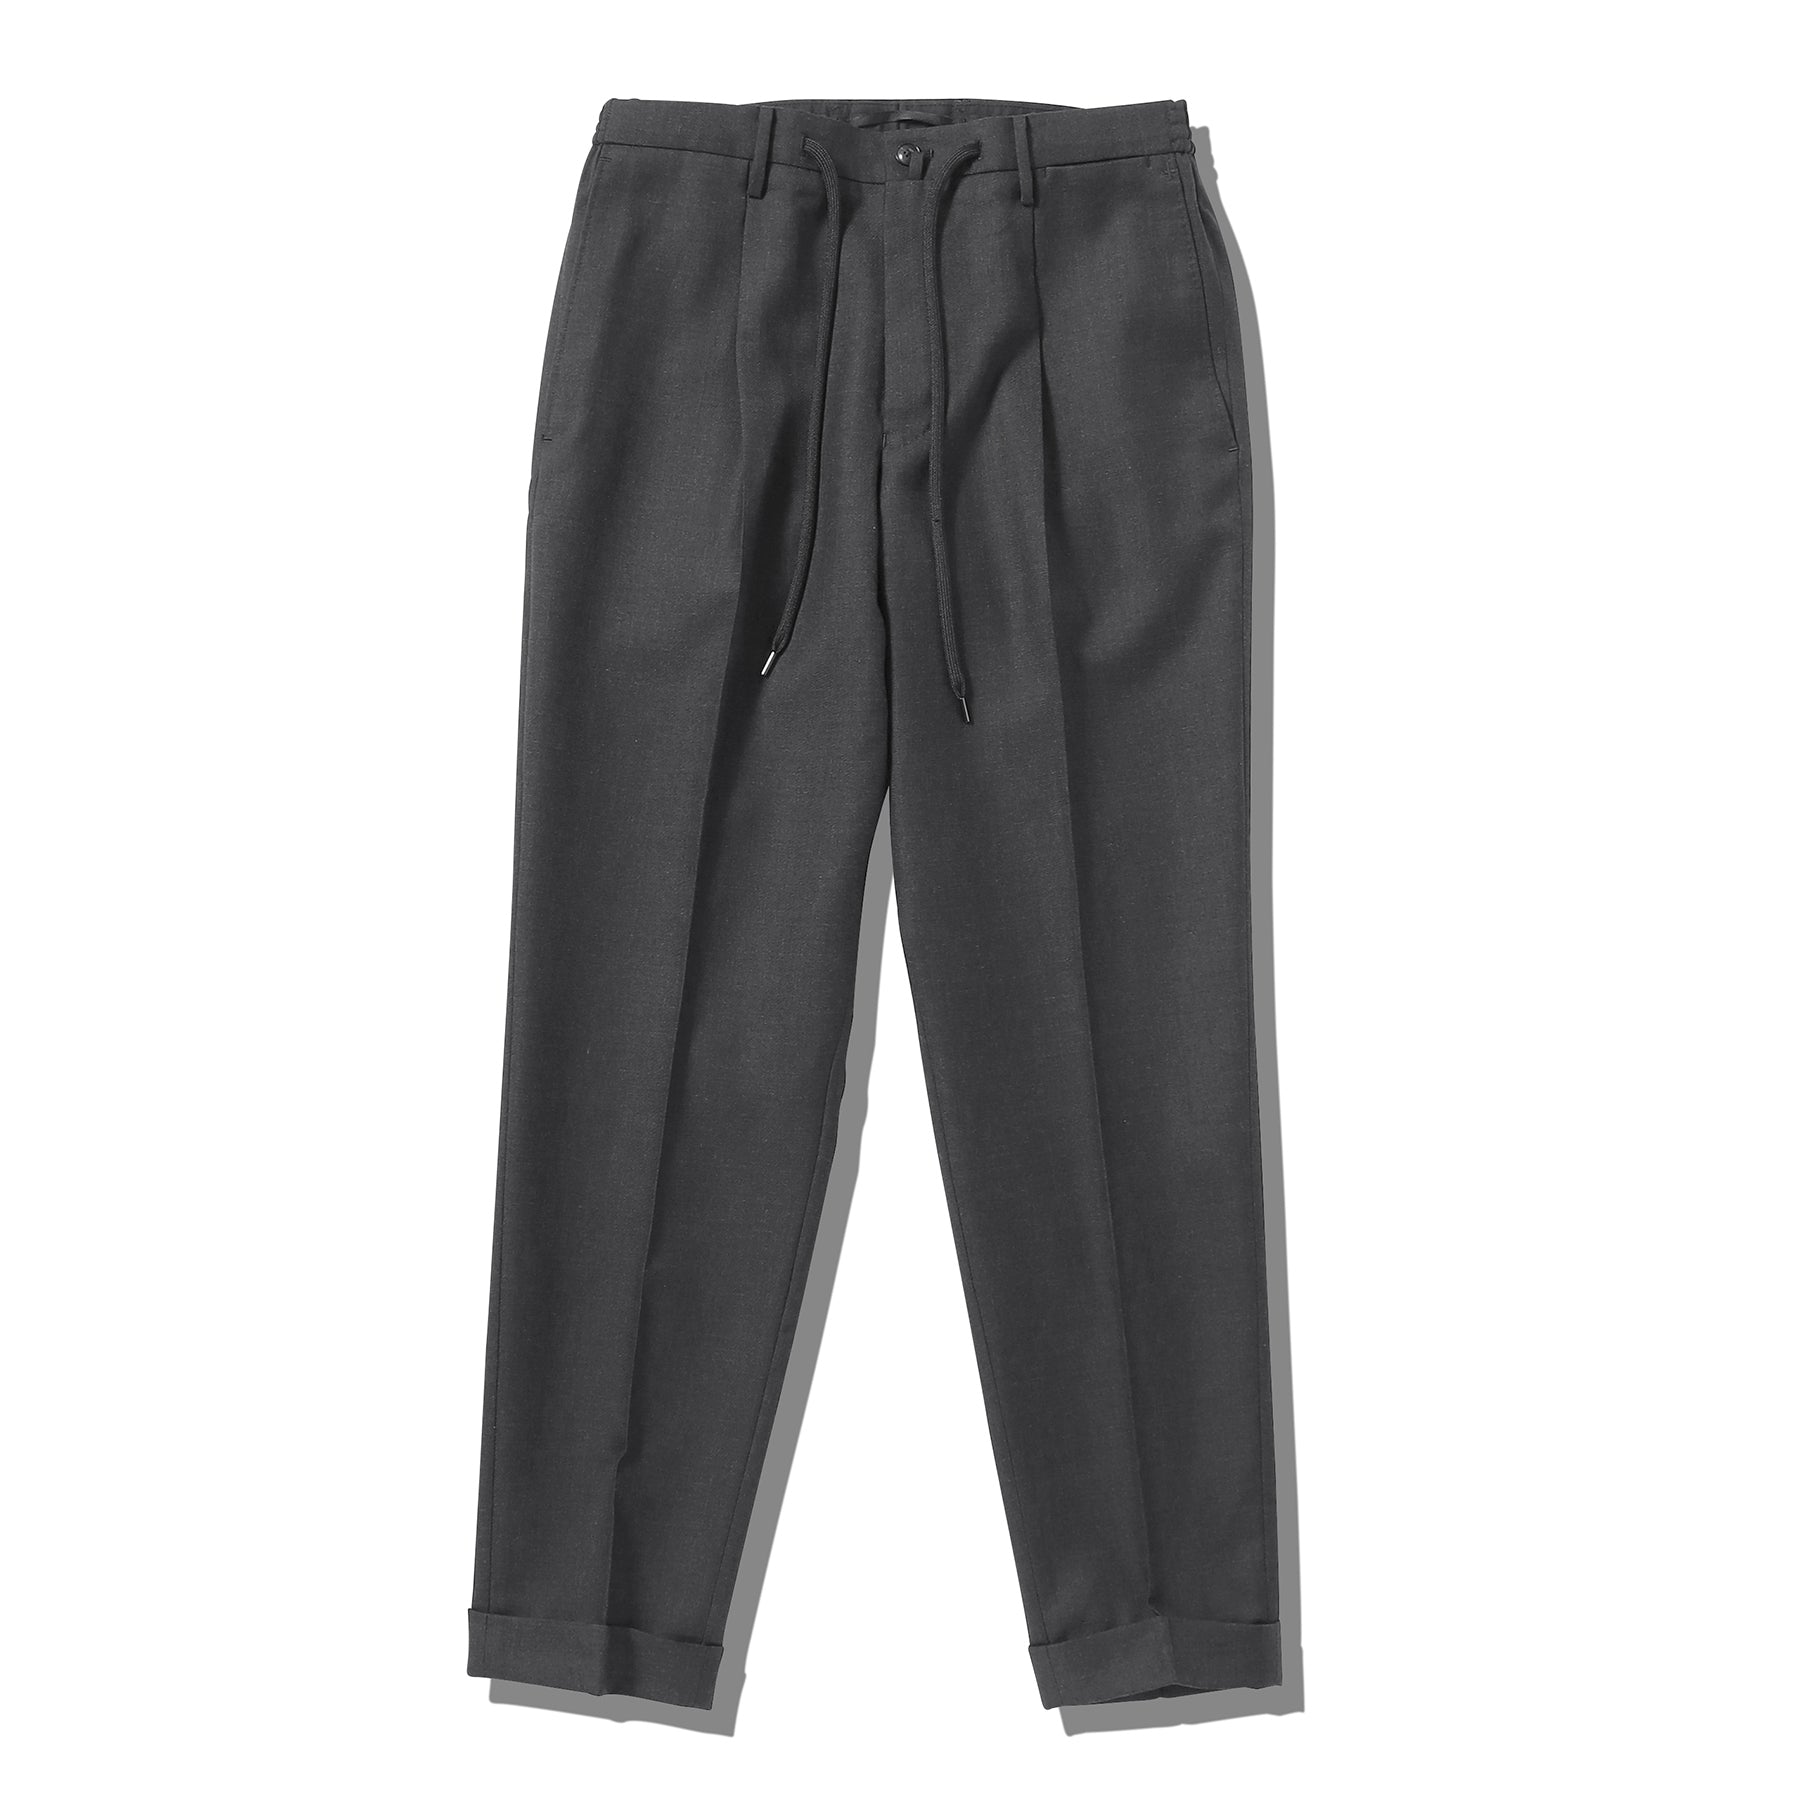 Twill Easy Trousers charcoalの商品画像